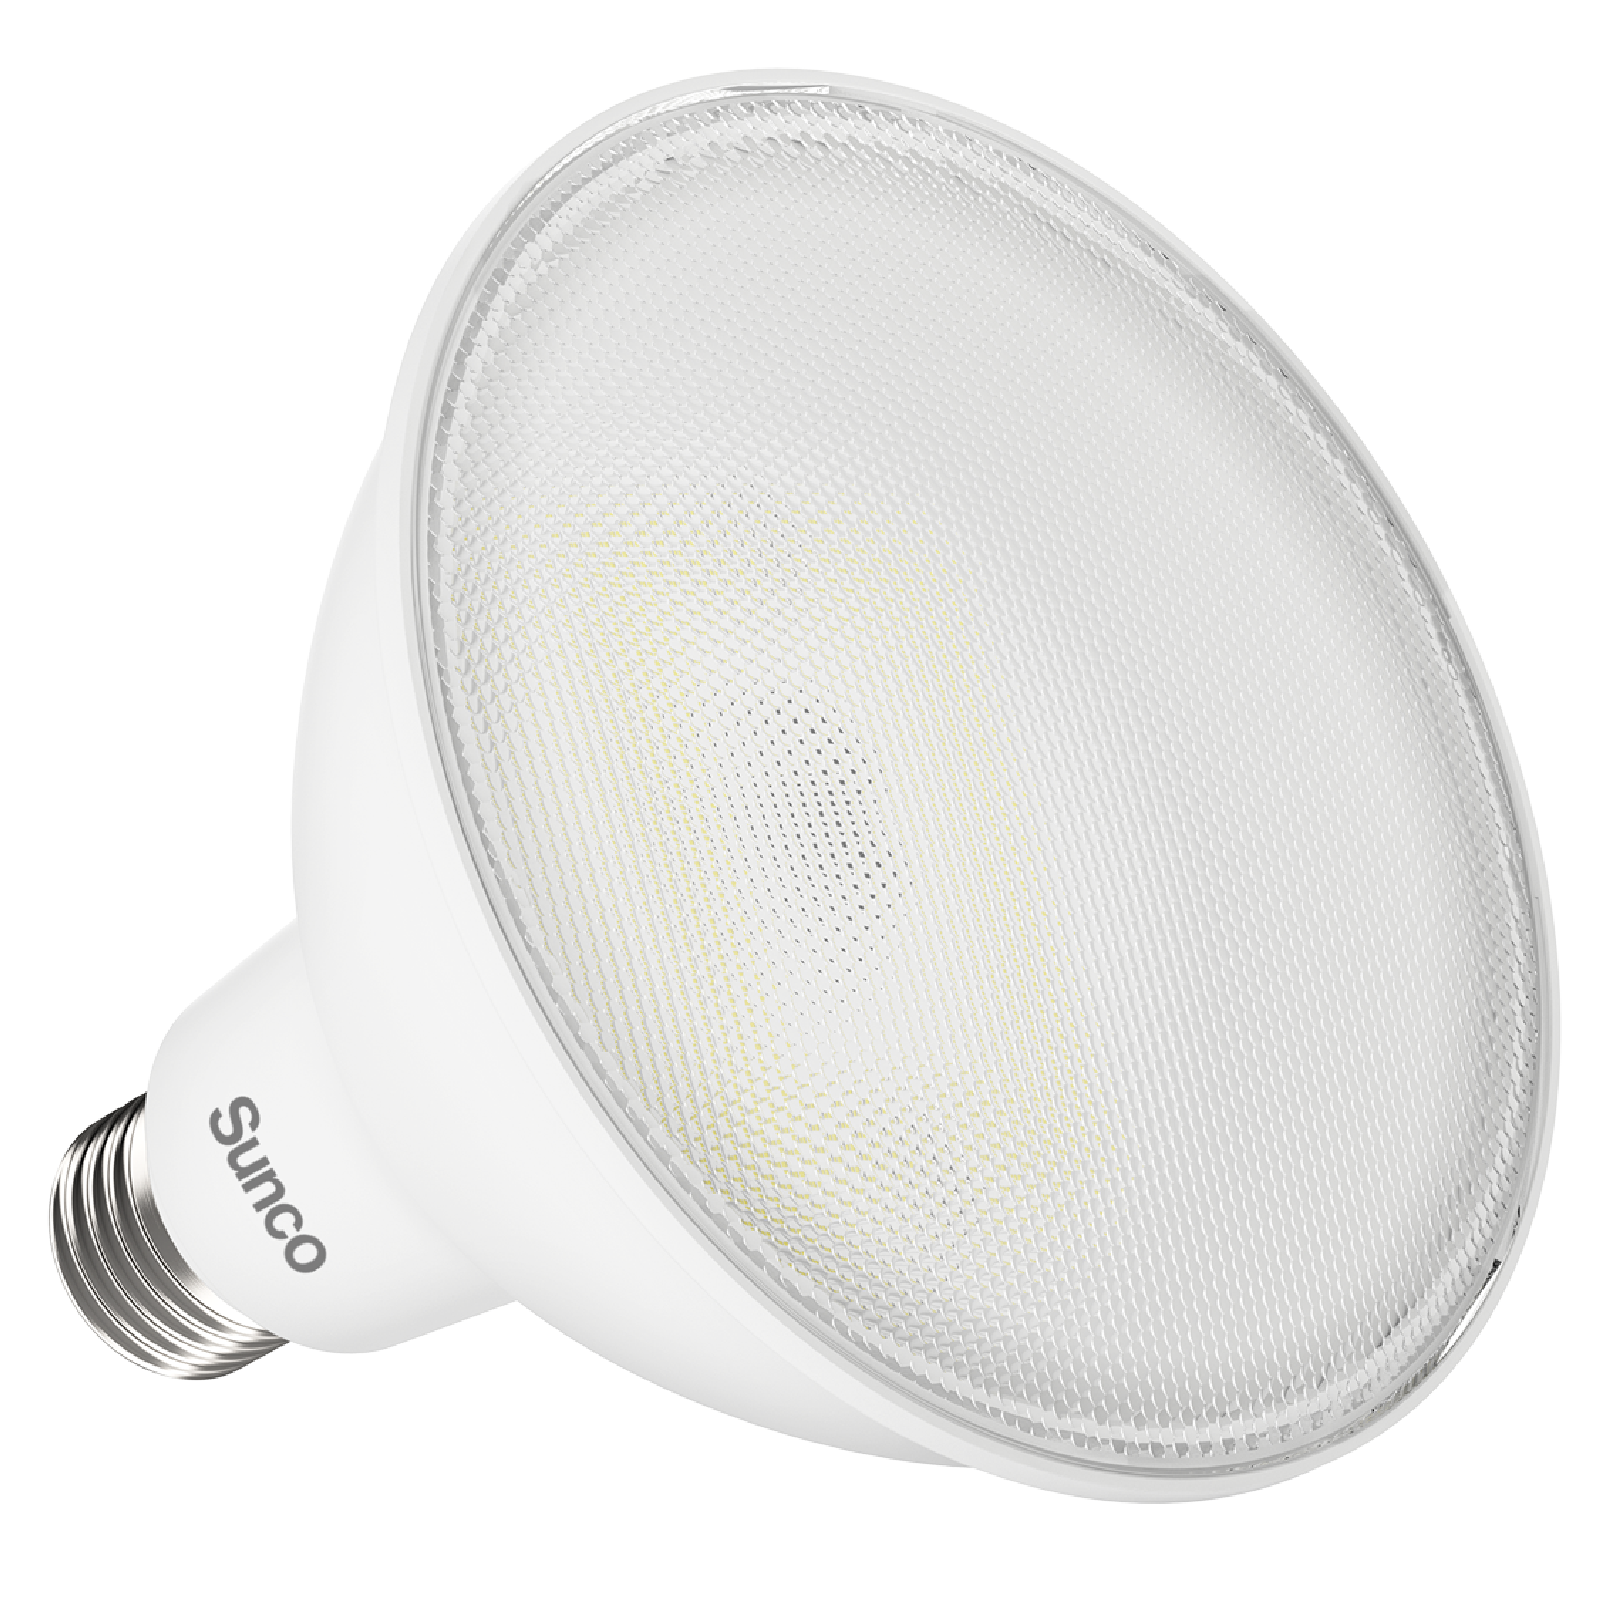 Lumens Vs Watts: A Guide for Choosing the Right LED Bulbs - Superior  Lighting